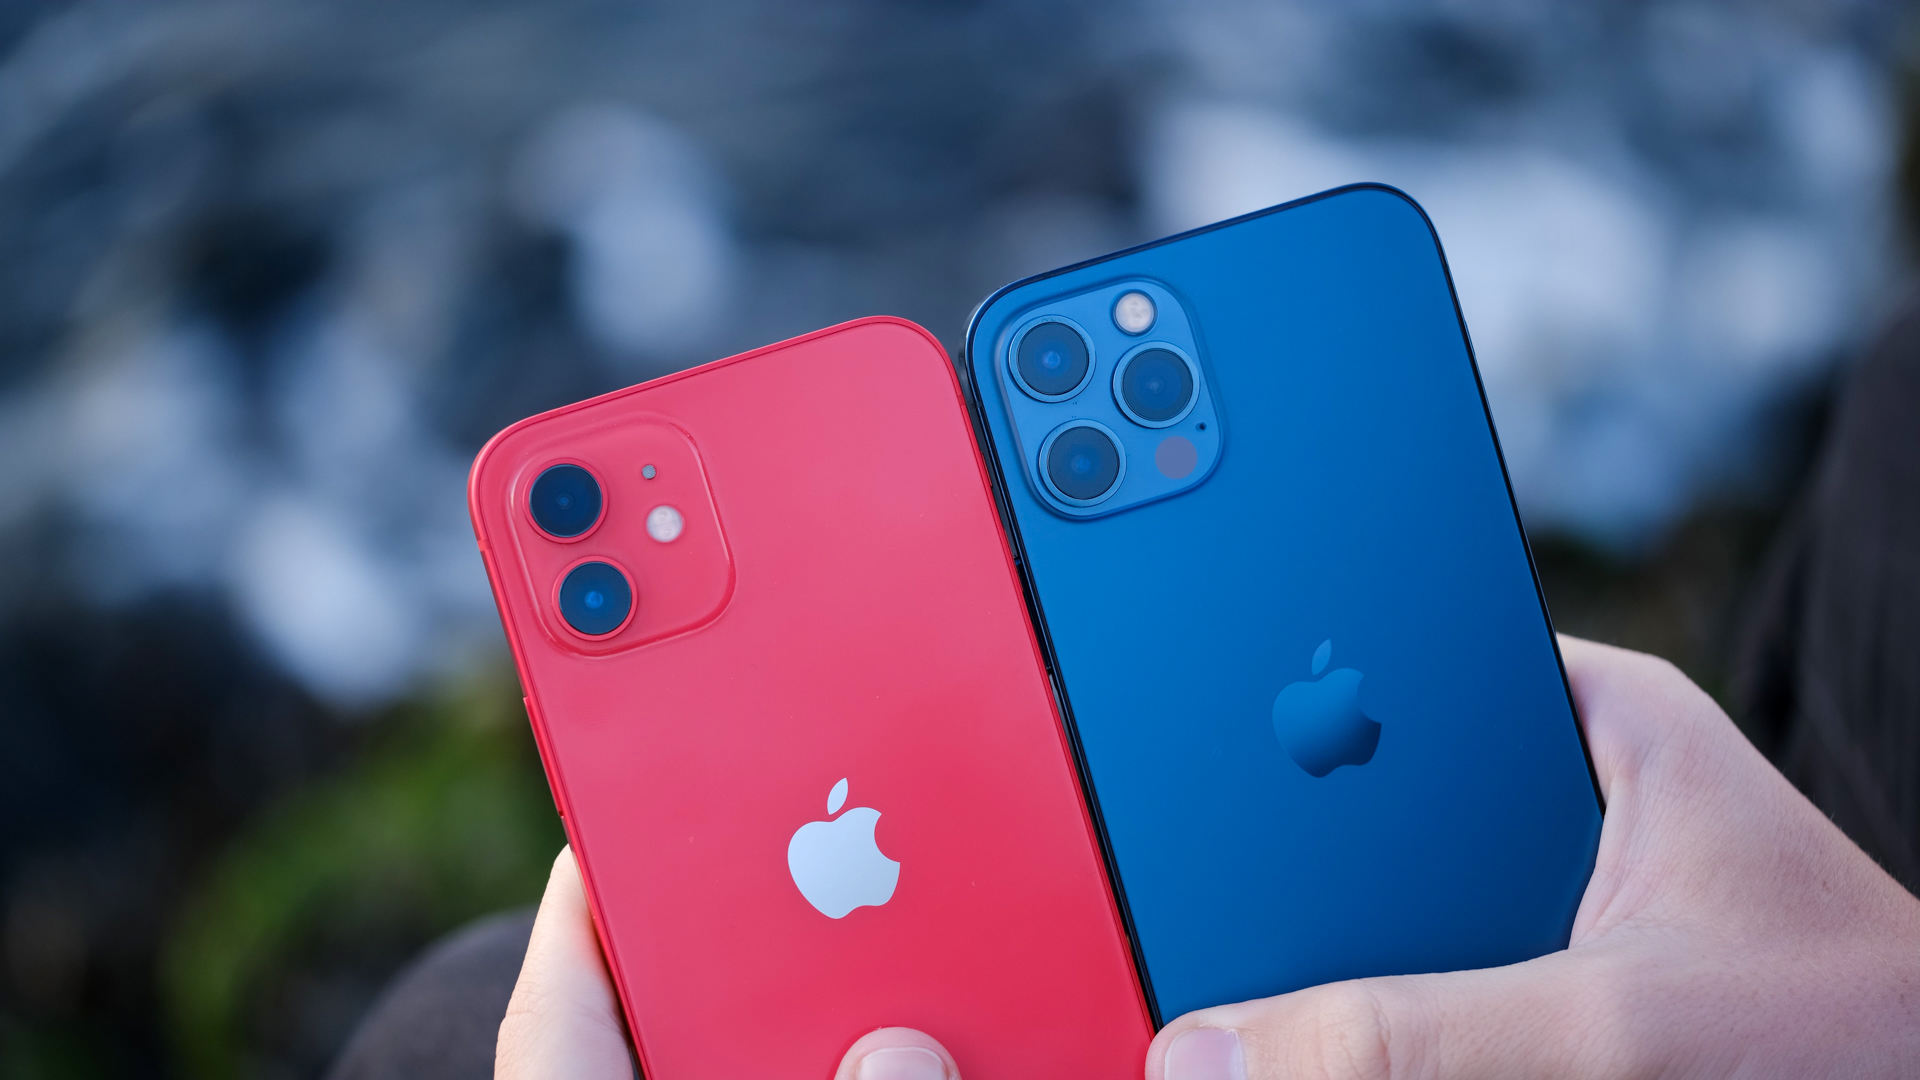 Apple iPhone 12 buyer's guide: What to know in 2022 - Android Authority